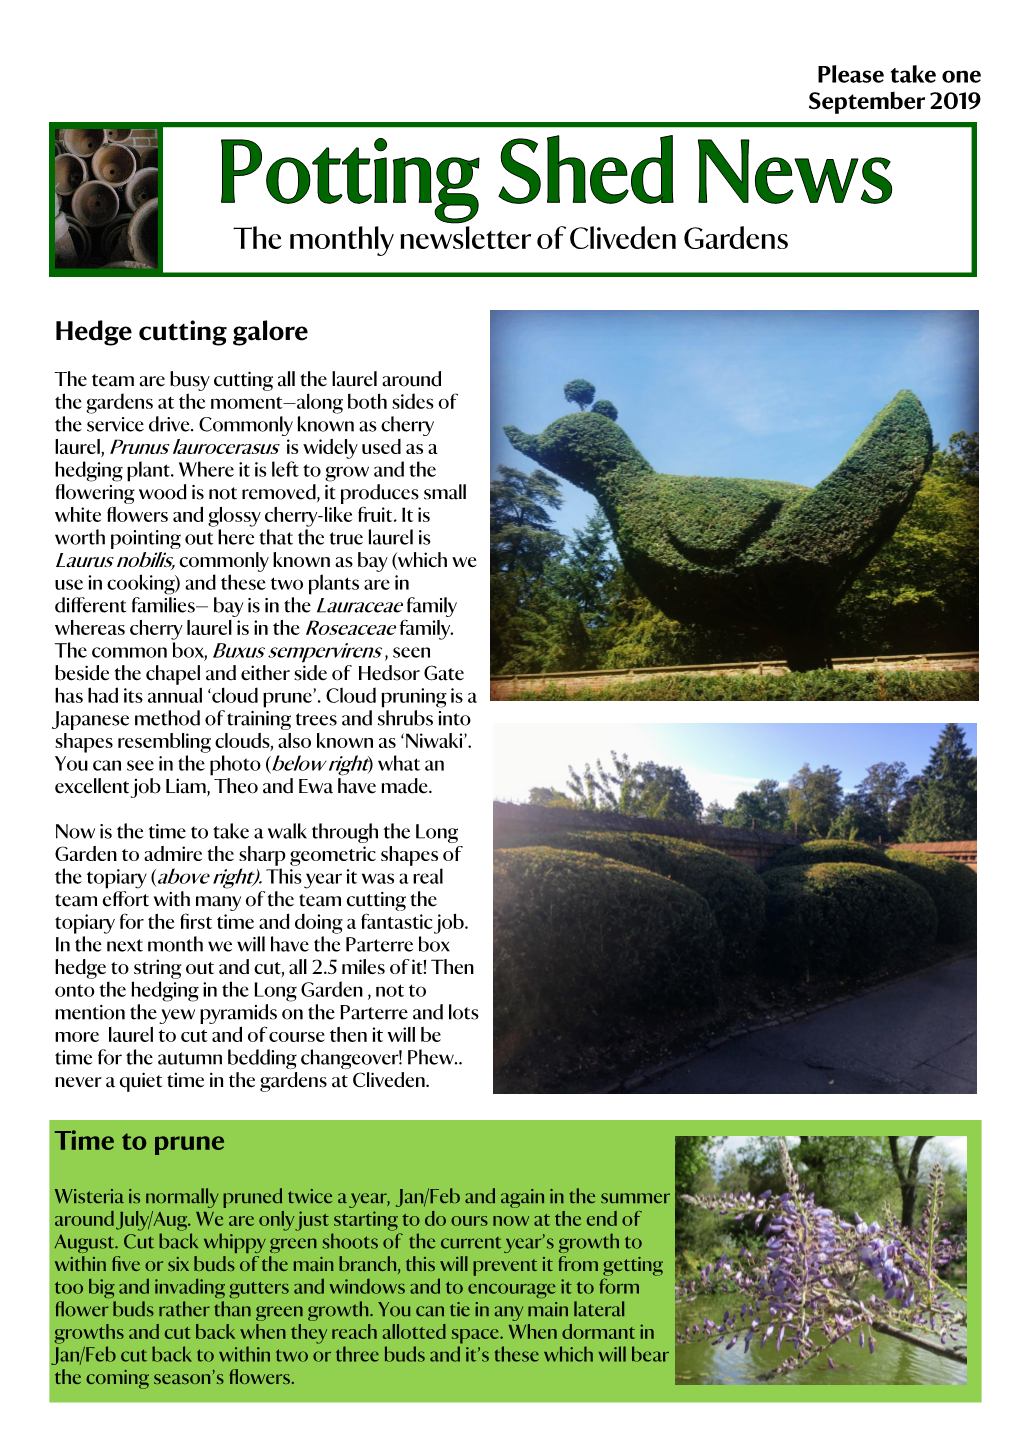 The Monthly Newsletter of Cliveden Gardens